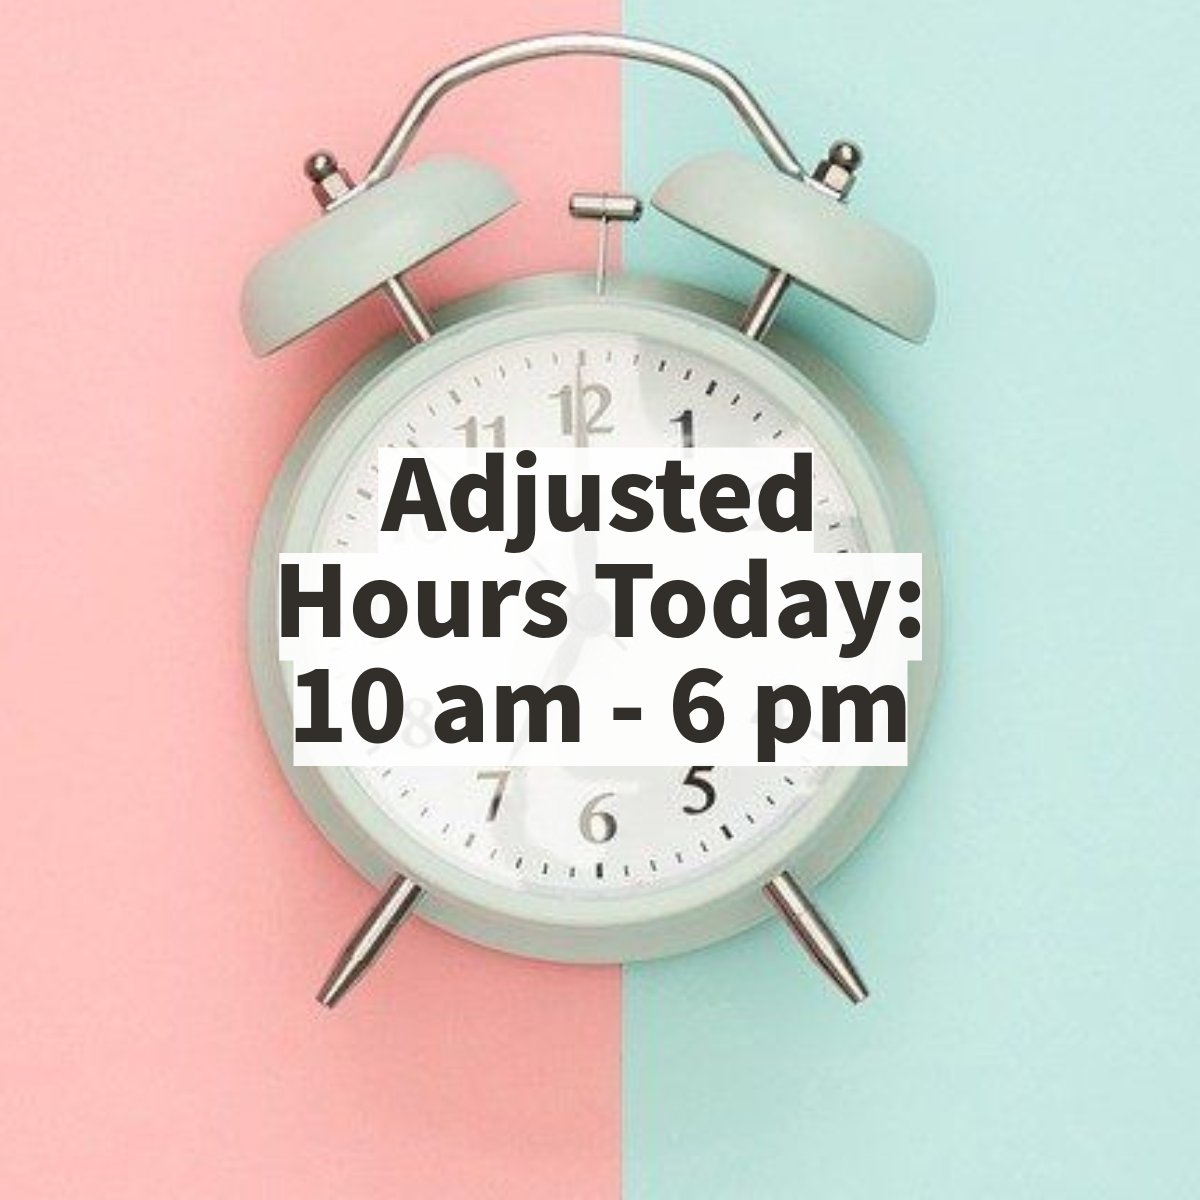 Please note that we have adjusted hours today due to NJIT's upcoming Spring Break. We are open from 10:00 am - 6:00 pm; please plan your library visit accordingly! We look forward to seeing you.

#njitlibrary #springbreak #adjustedhours